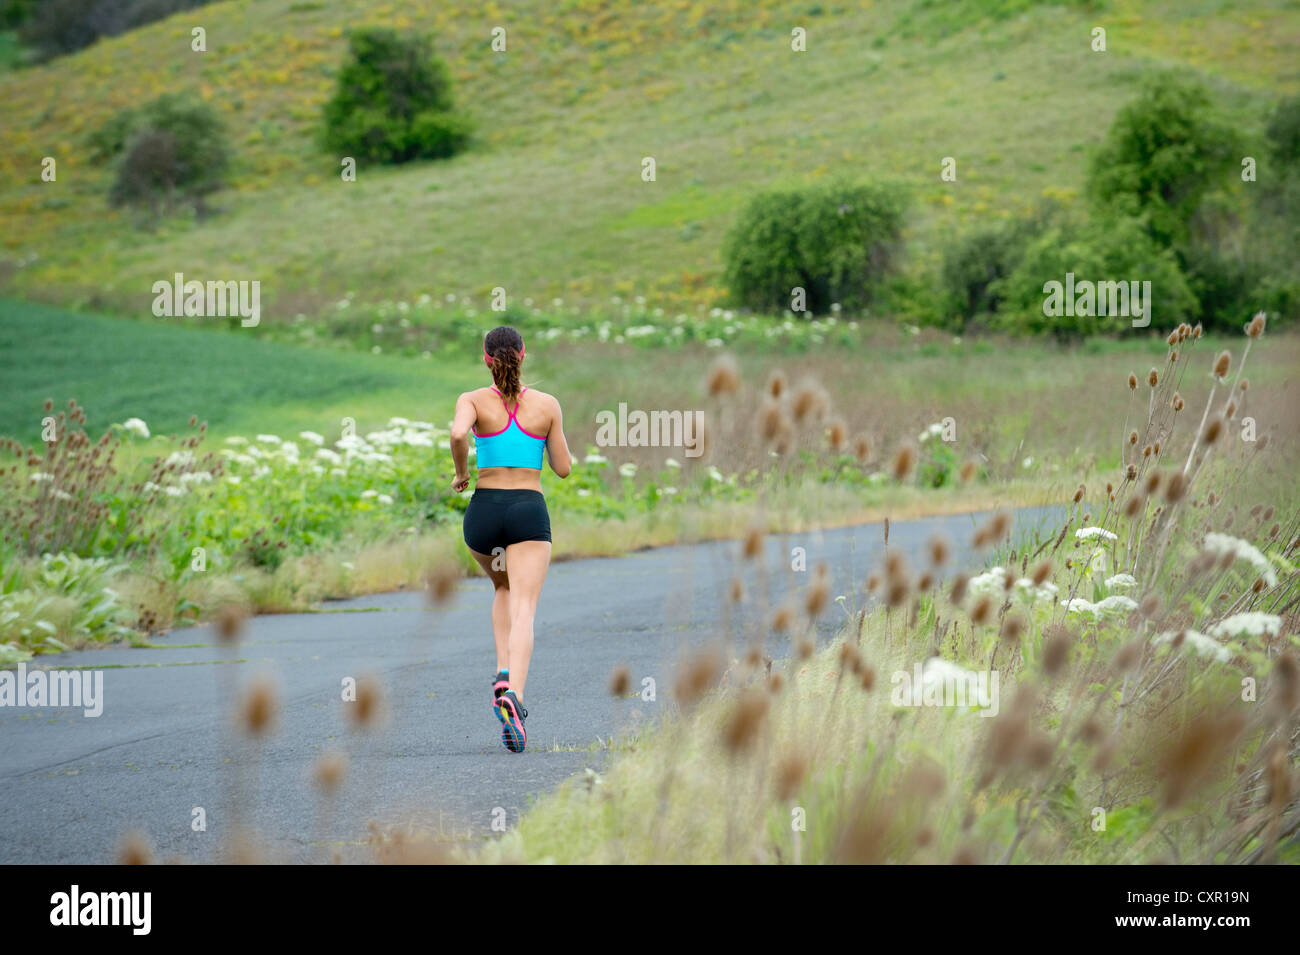 Young woman running in rural setting Banque D'Images